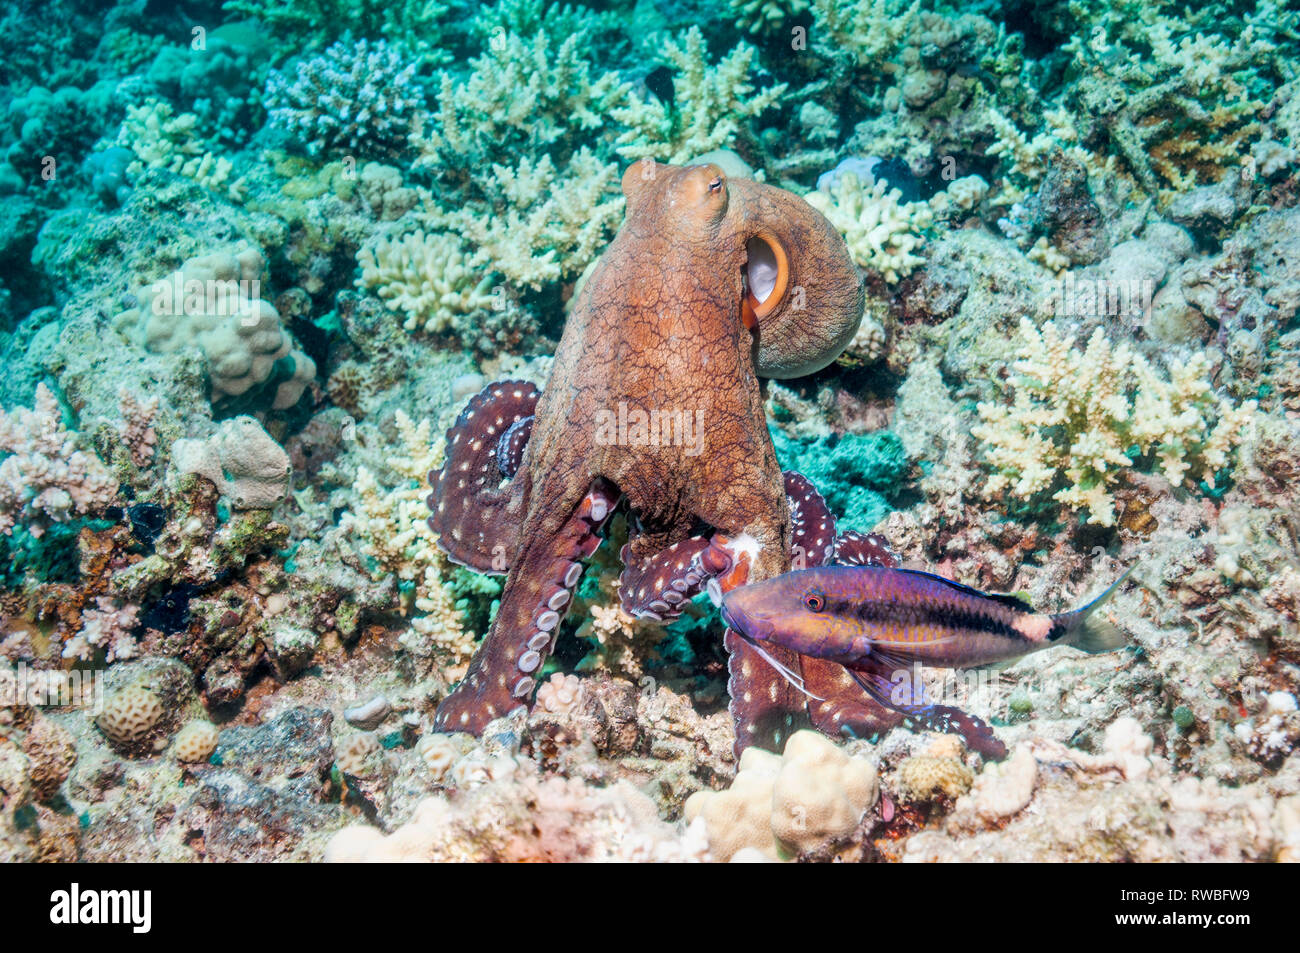 A hunting Day octopus [Octopus cyanea] closely watched by a Dot-and-dash goatfish [Parupeneus barberinus].  Egypt, Red Sea. Stock Photo